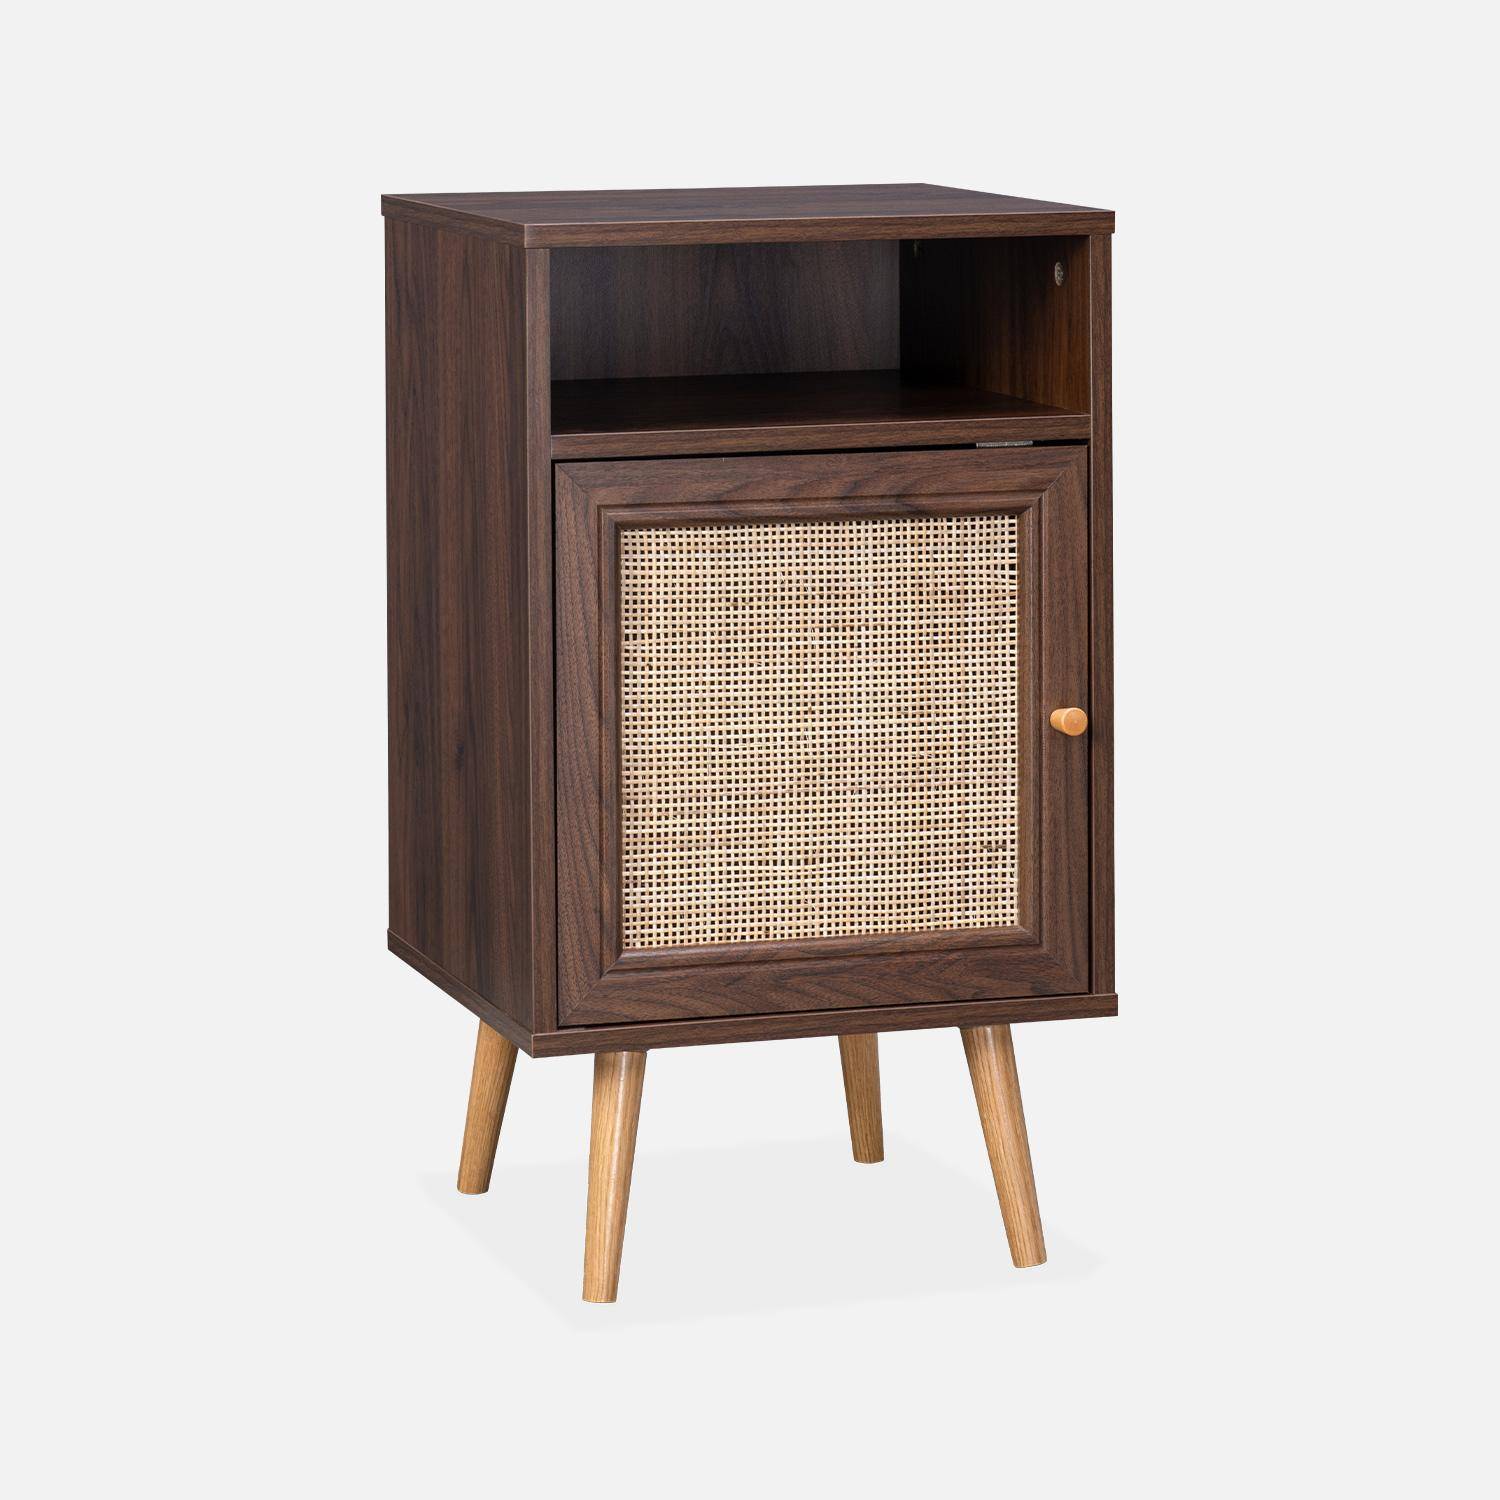 Pair of Scandi-style wood and cane rattan bedside tables with cupboard, 40x39x70cm - Boheme - Dark Wood colour Photo5